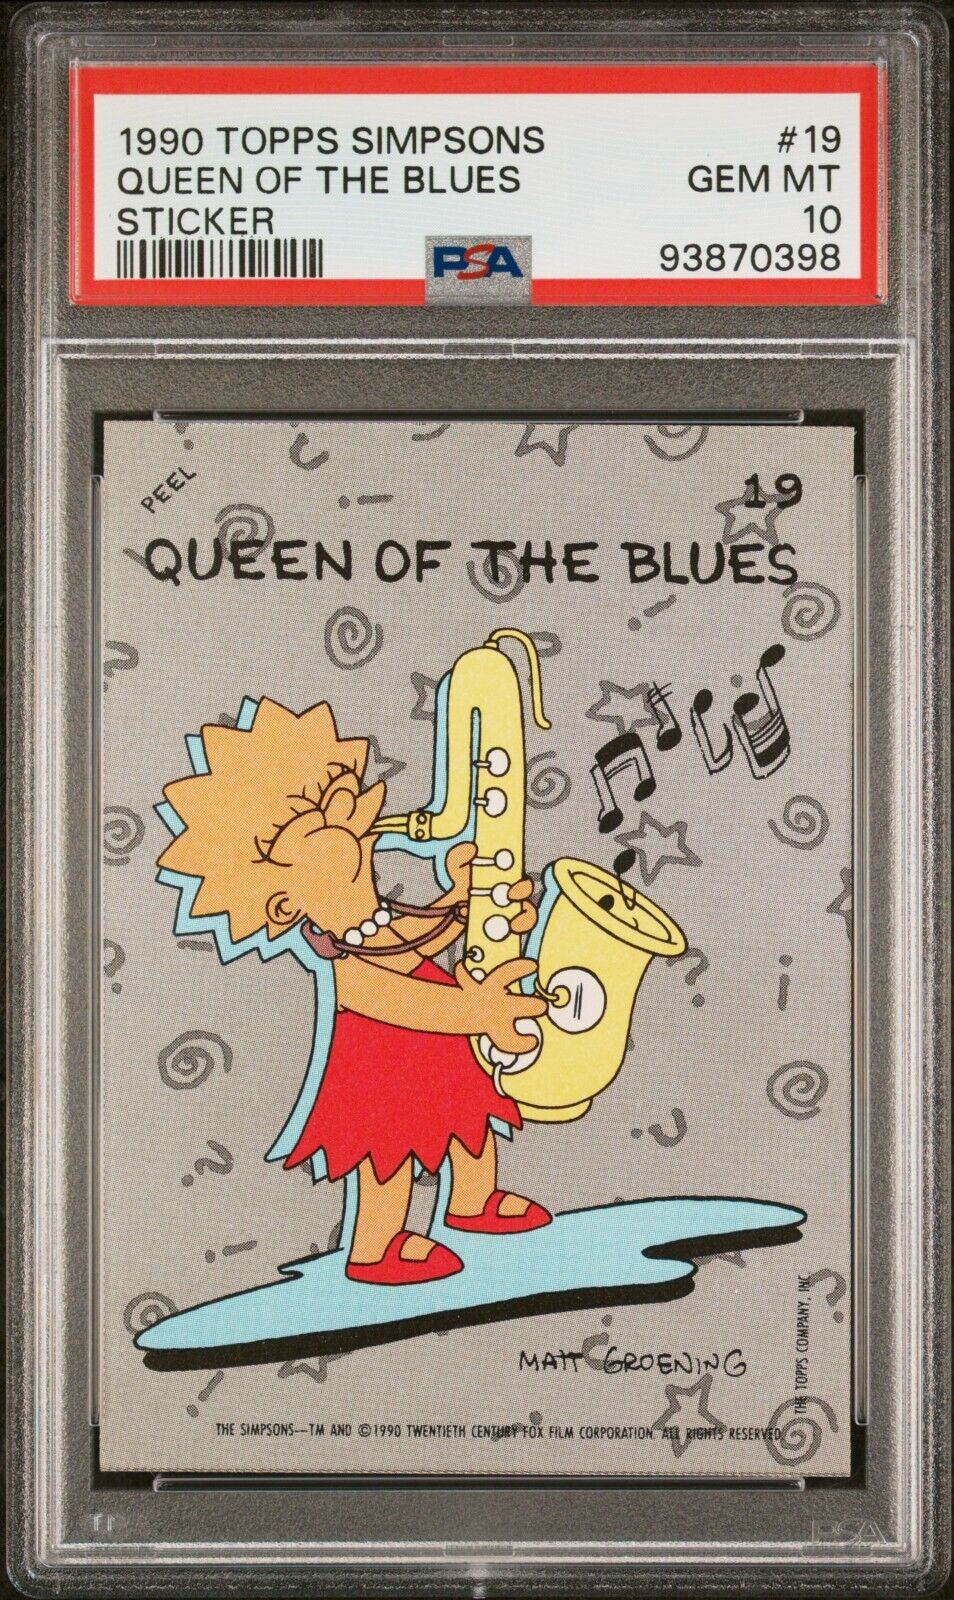 1990 Topps The Simpsons Stickers #19 Queen of the Blues Lisa Simpson PSA 10